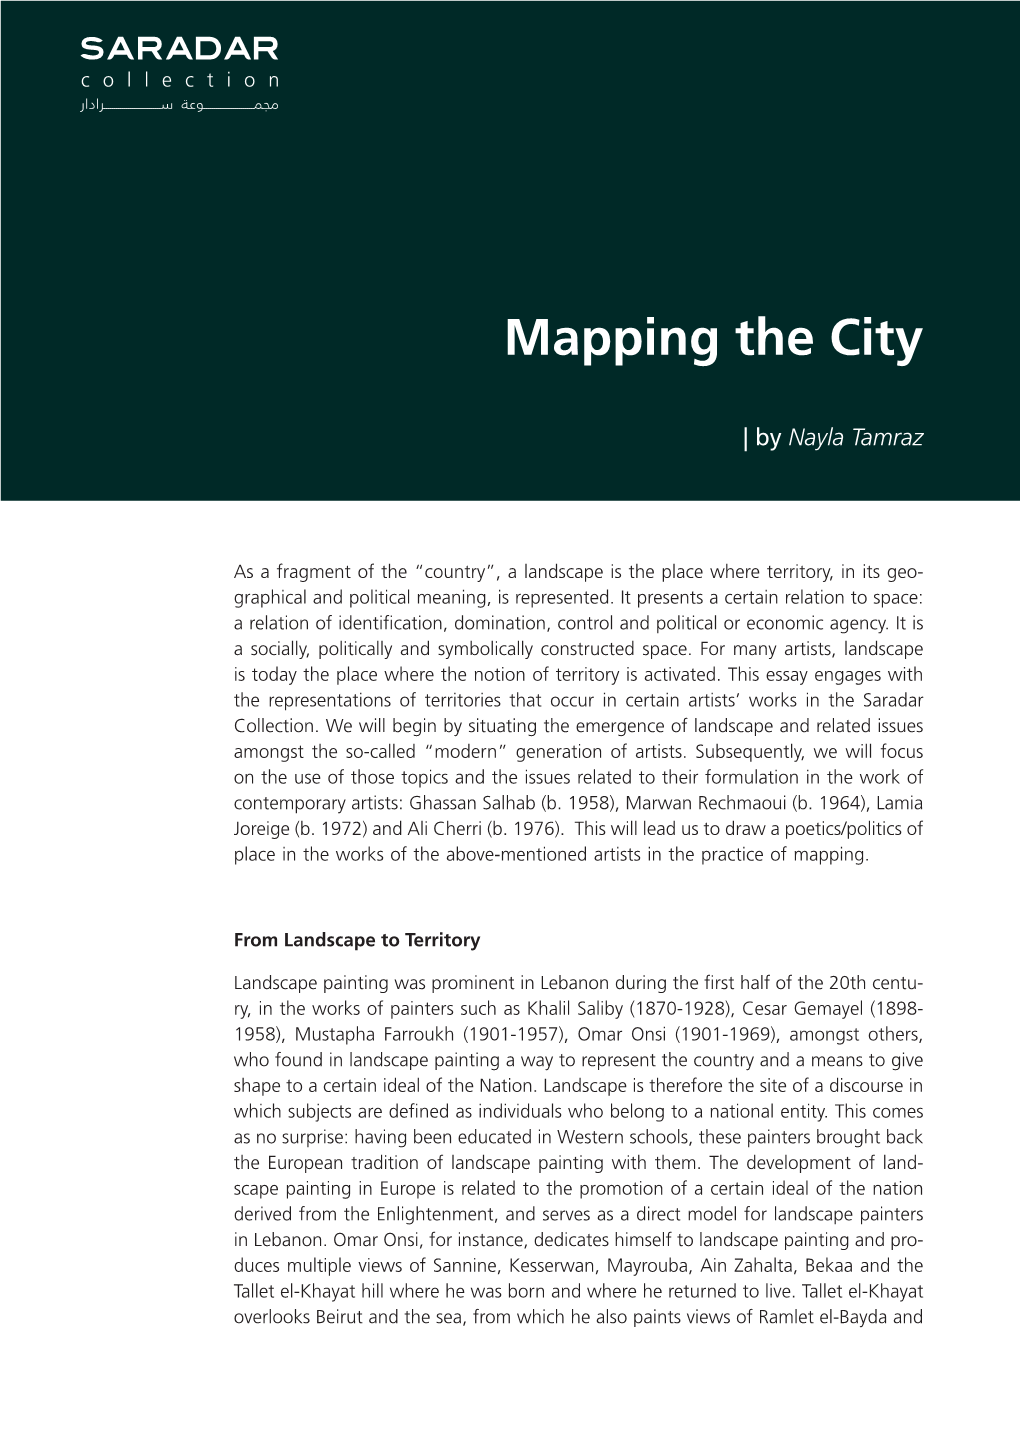 Mapping the City